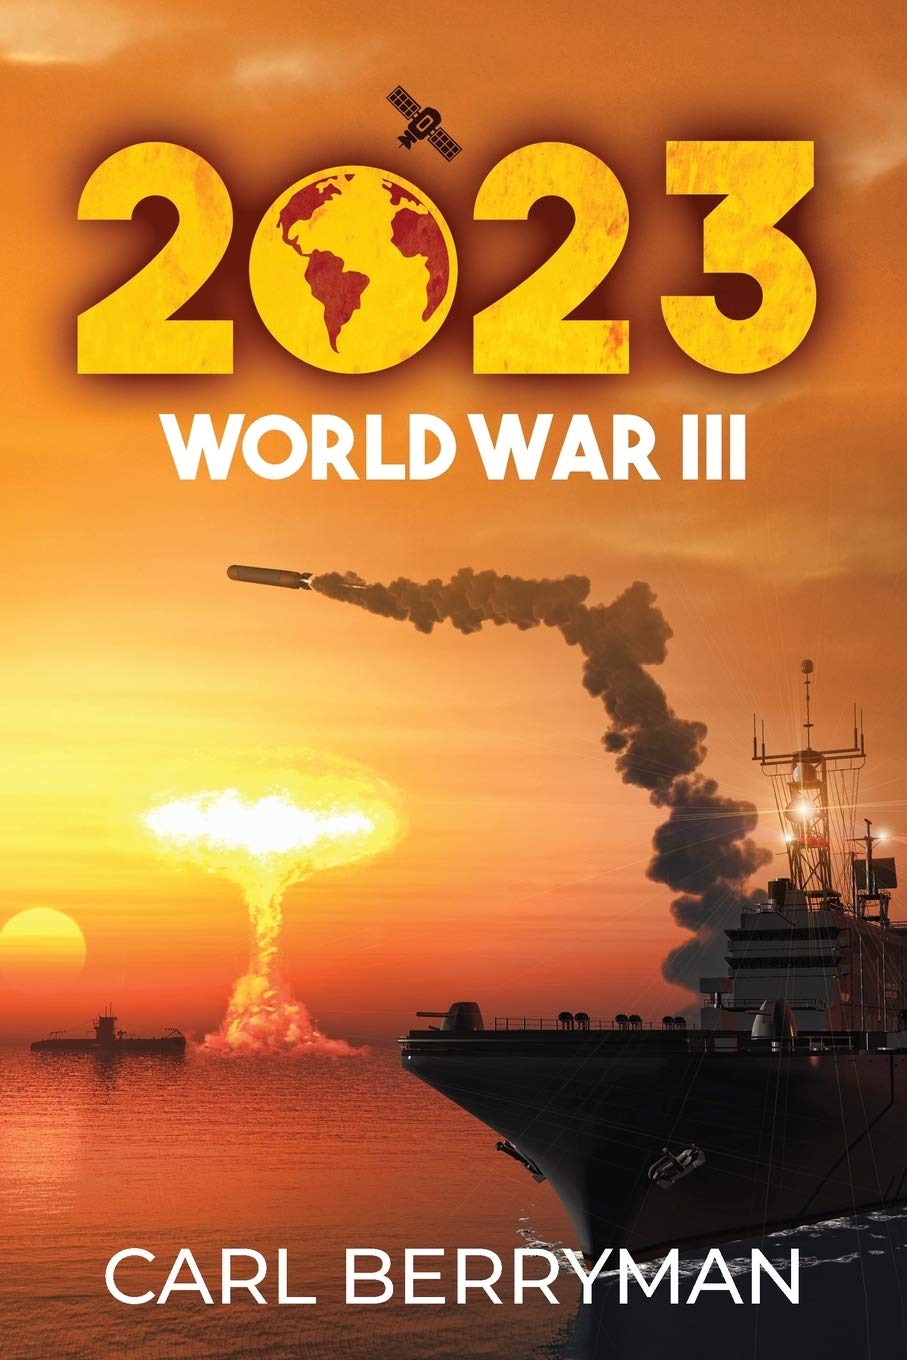 Author's Tranquility Press Backs Carl Berryman’s Exploration of China in 2023: World War III